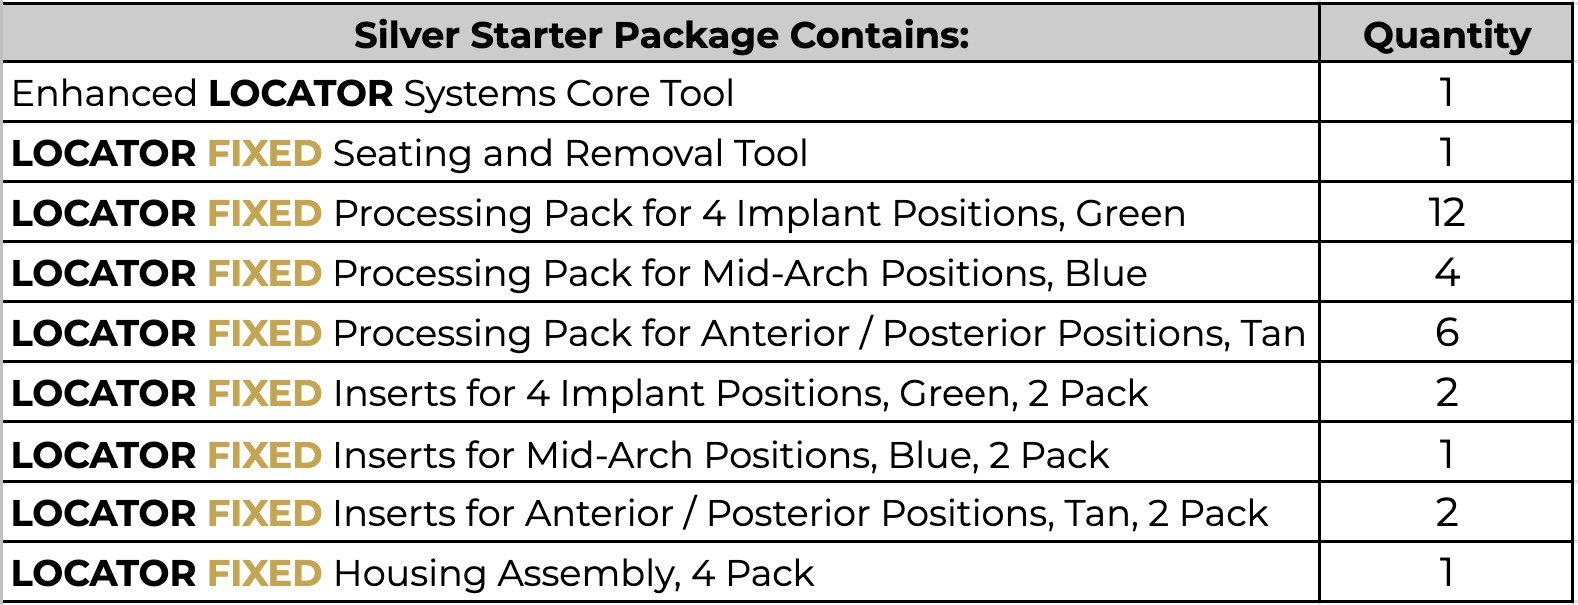 Silver LOCATOR FIXED Starter Package Contains These Items